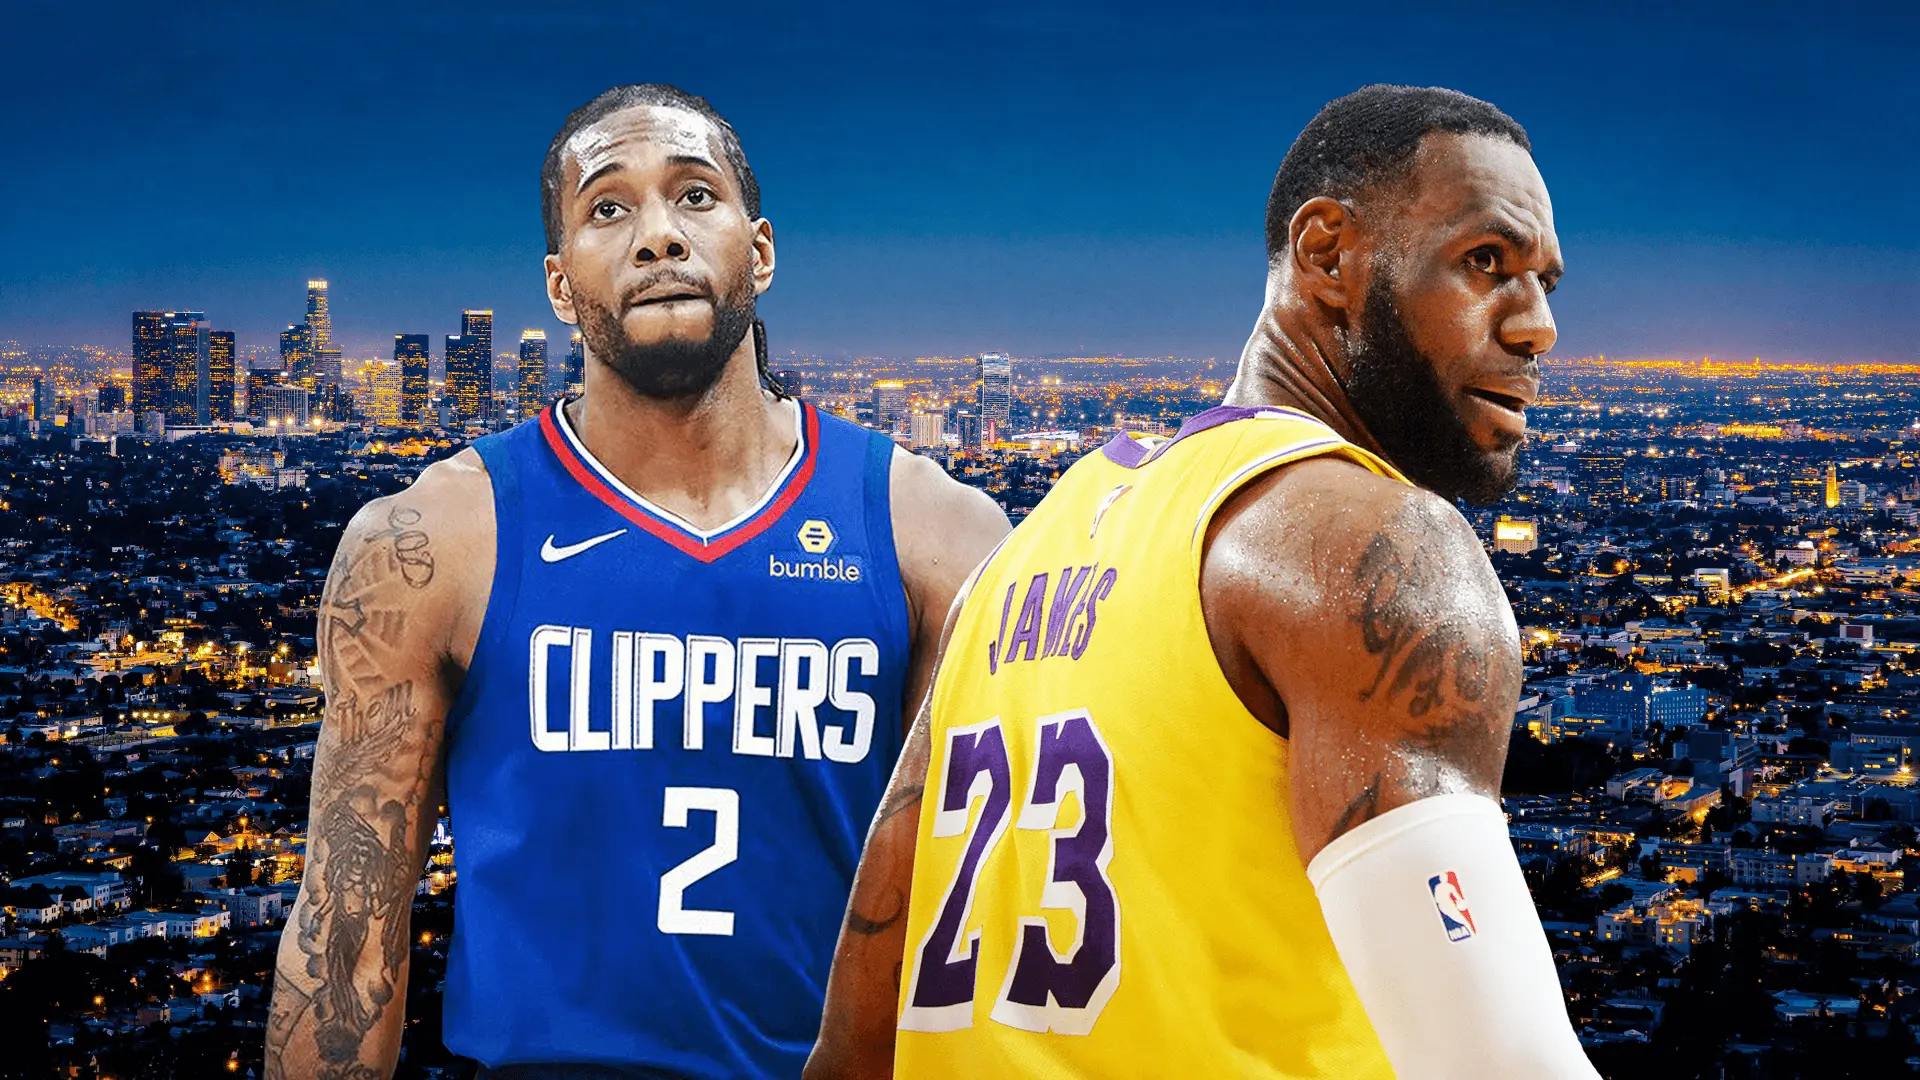 Kawhi Leonard and LeBron James join two former underdog NBA franchises in a battle for Los Angeles